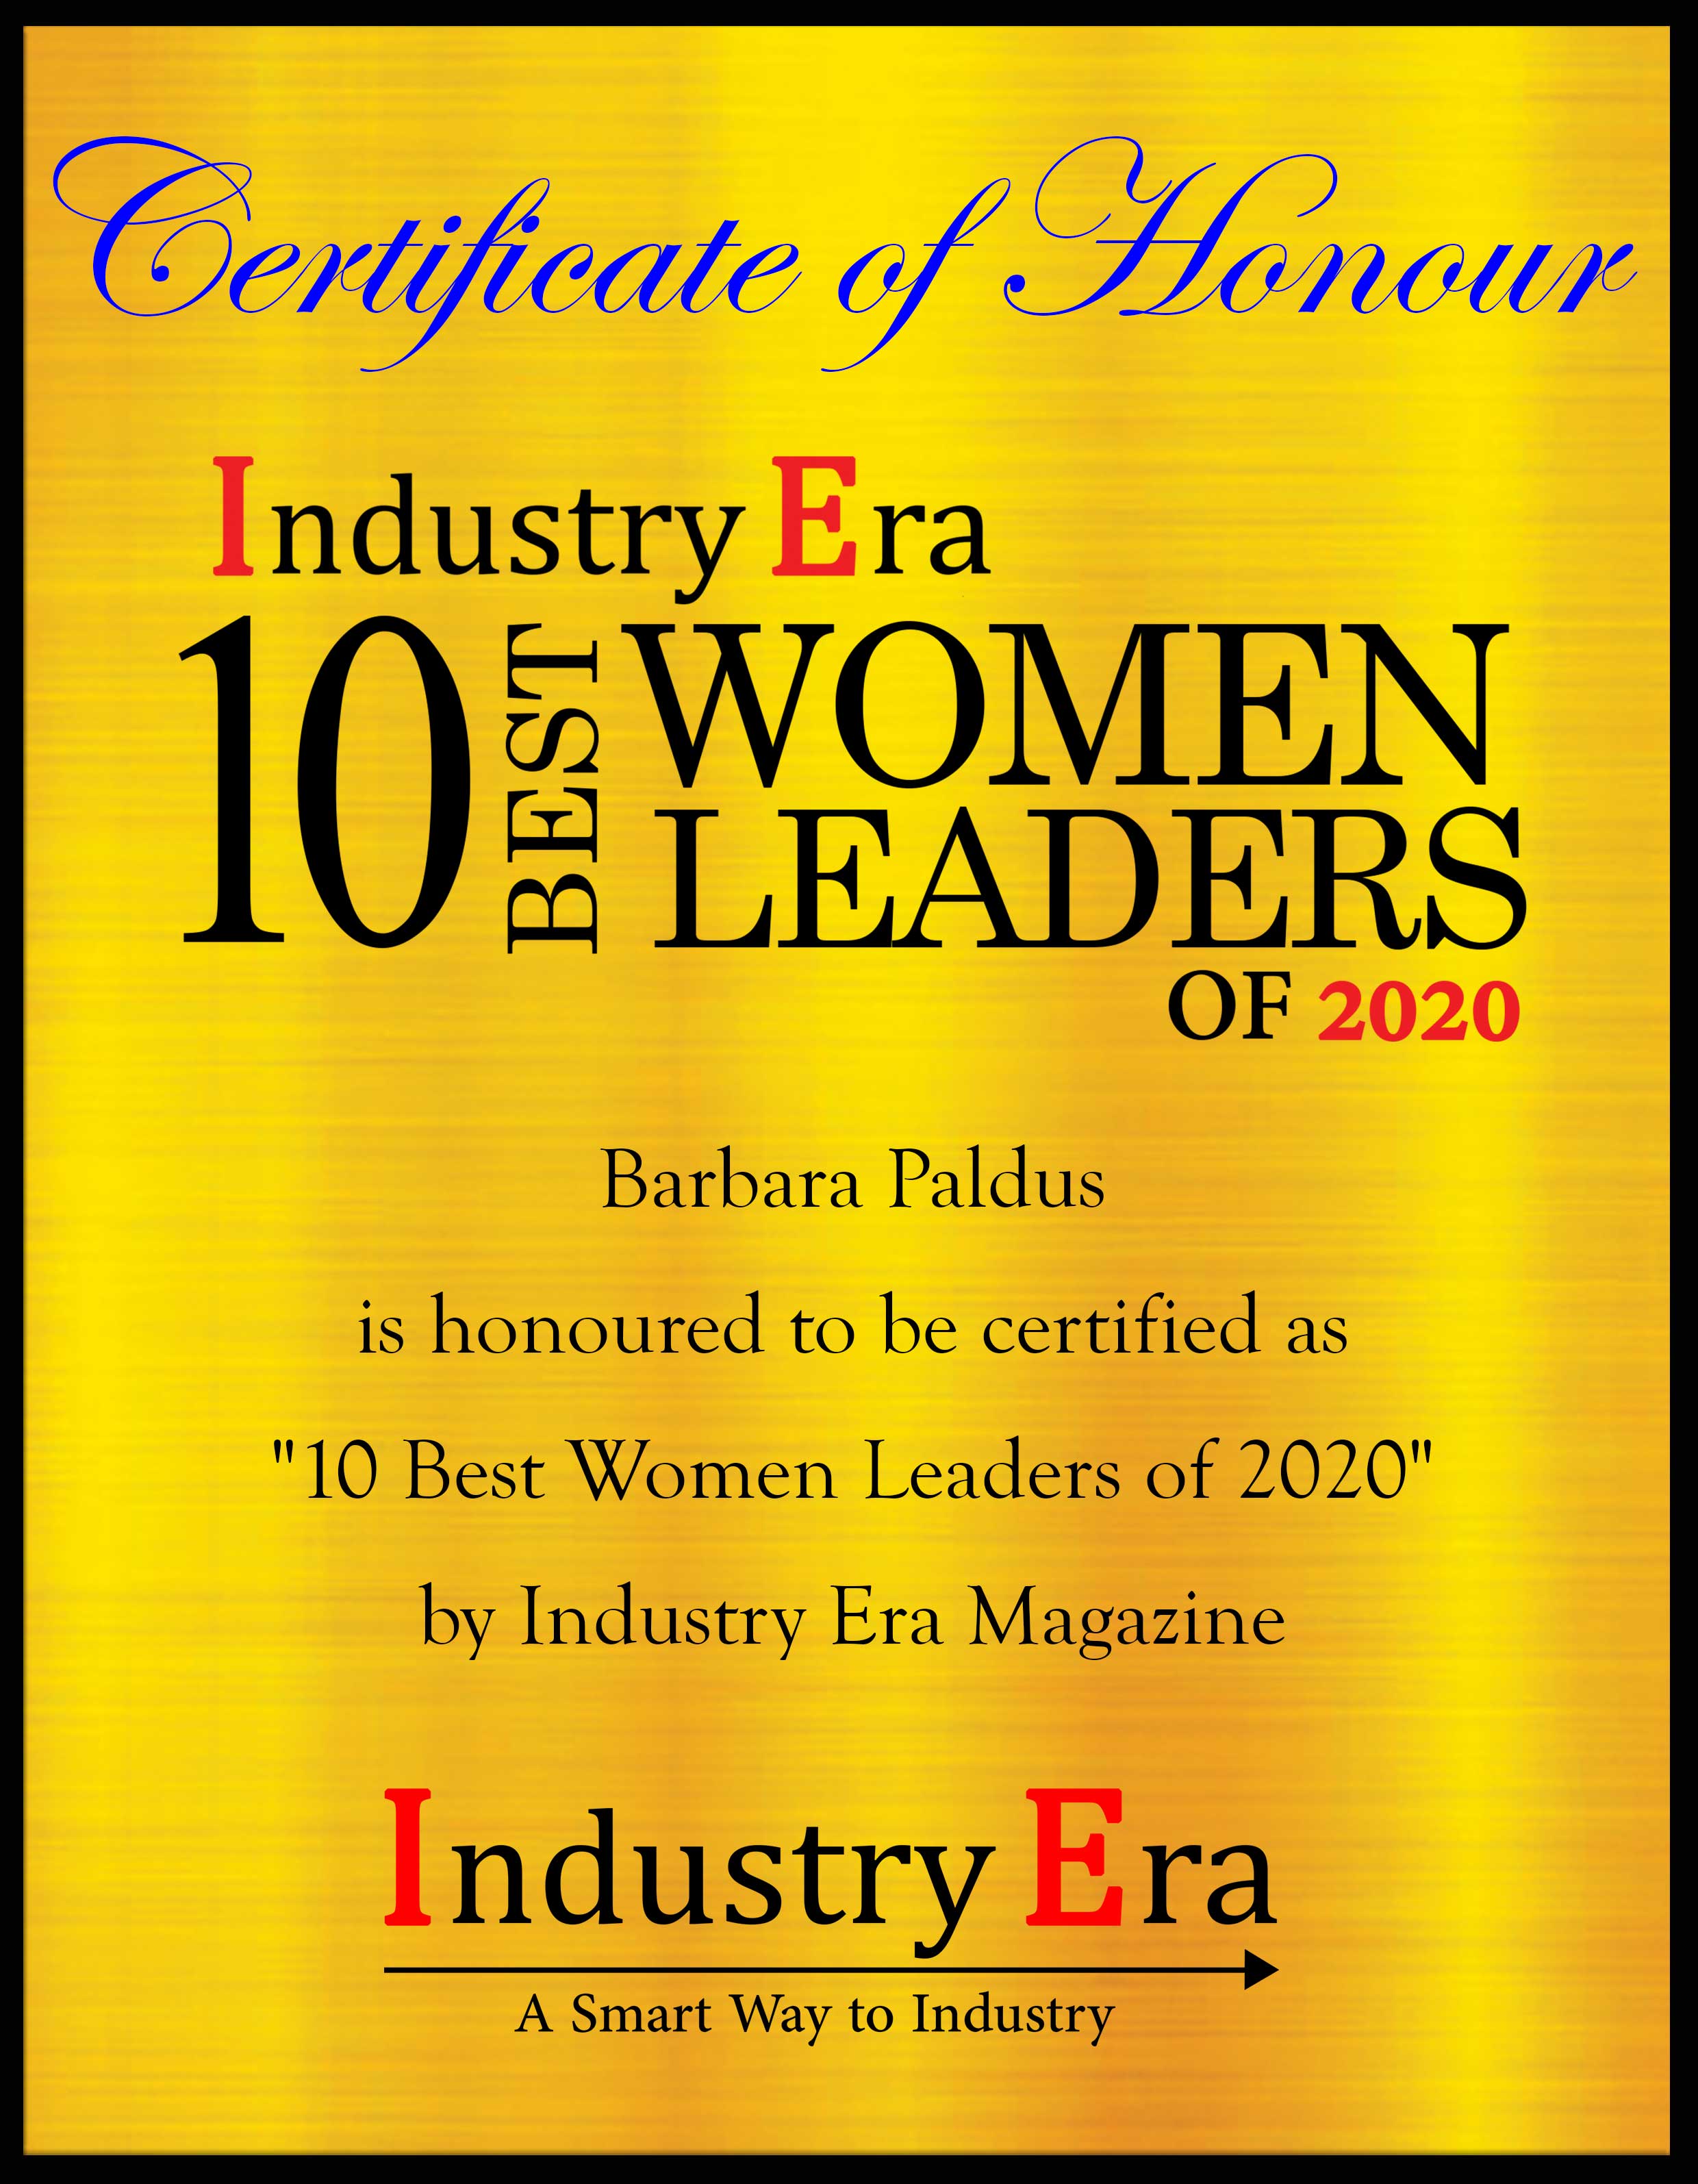 Barbara Paldus, founder and CEO  of Codex Beauty Certificate